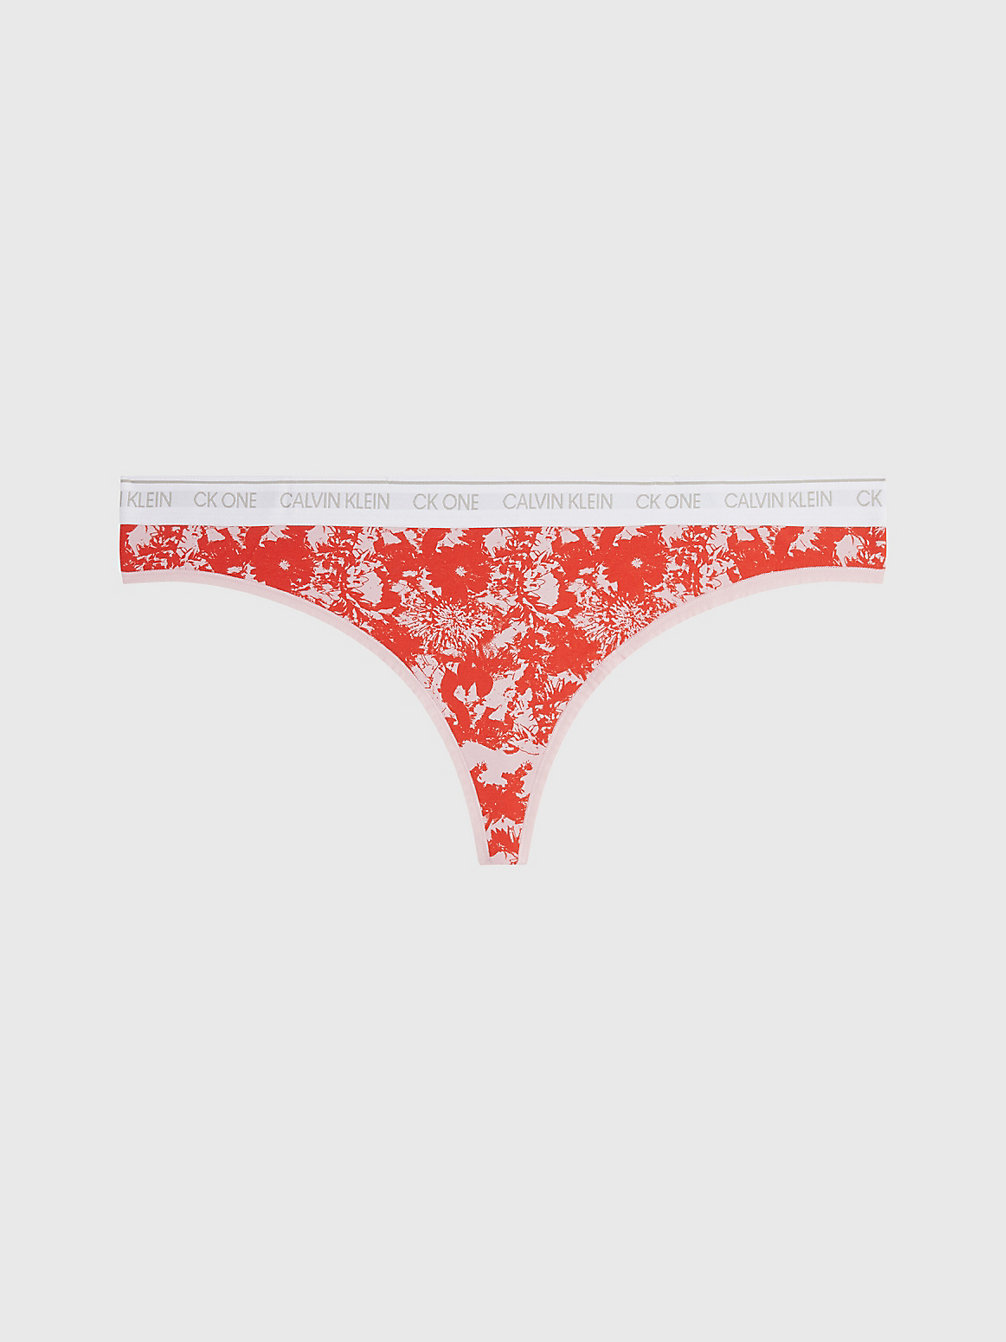 Tanga De Talla Grande - CK One > SOLAR FLORAL PRINT_PINK SHELL > undefined mujer > Calvin Klein